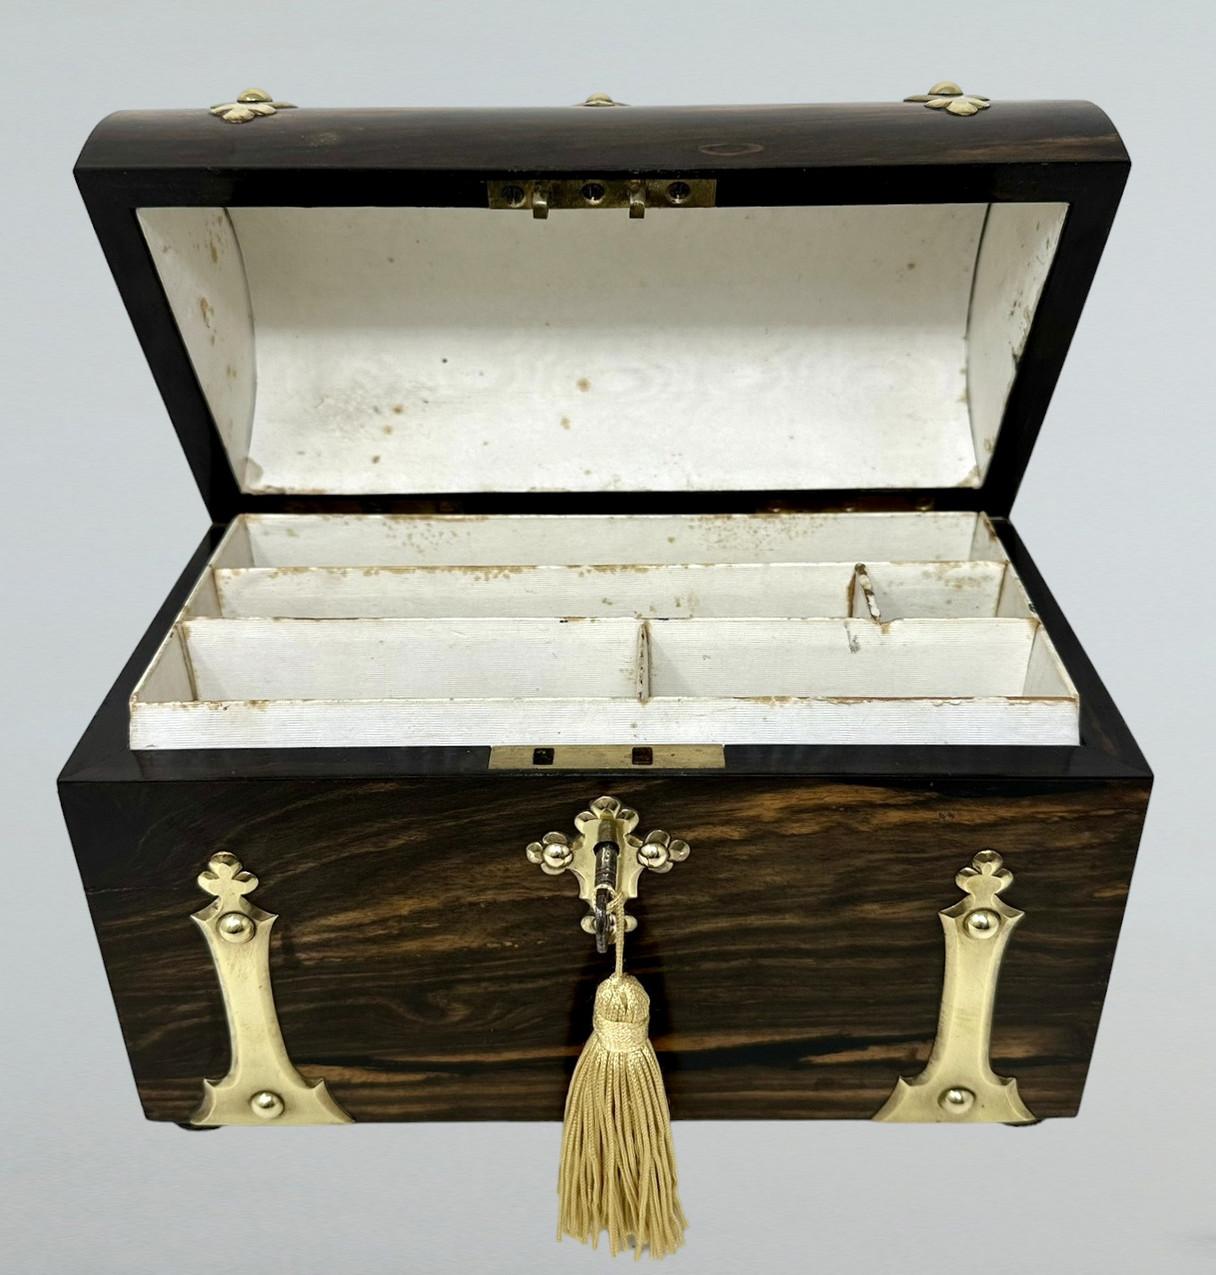 Antique Victorian Coromandel Brass Wooden Letters Stationery Writing Box Casket In Good Condition For Sale In Dublin, Ireland